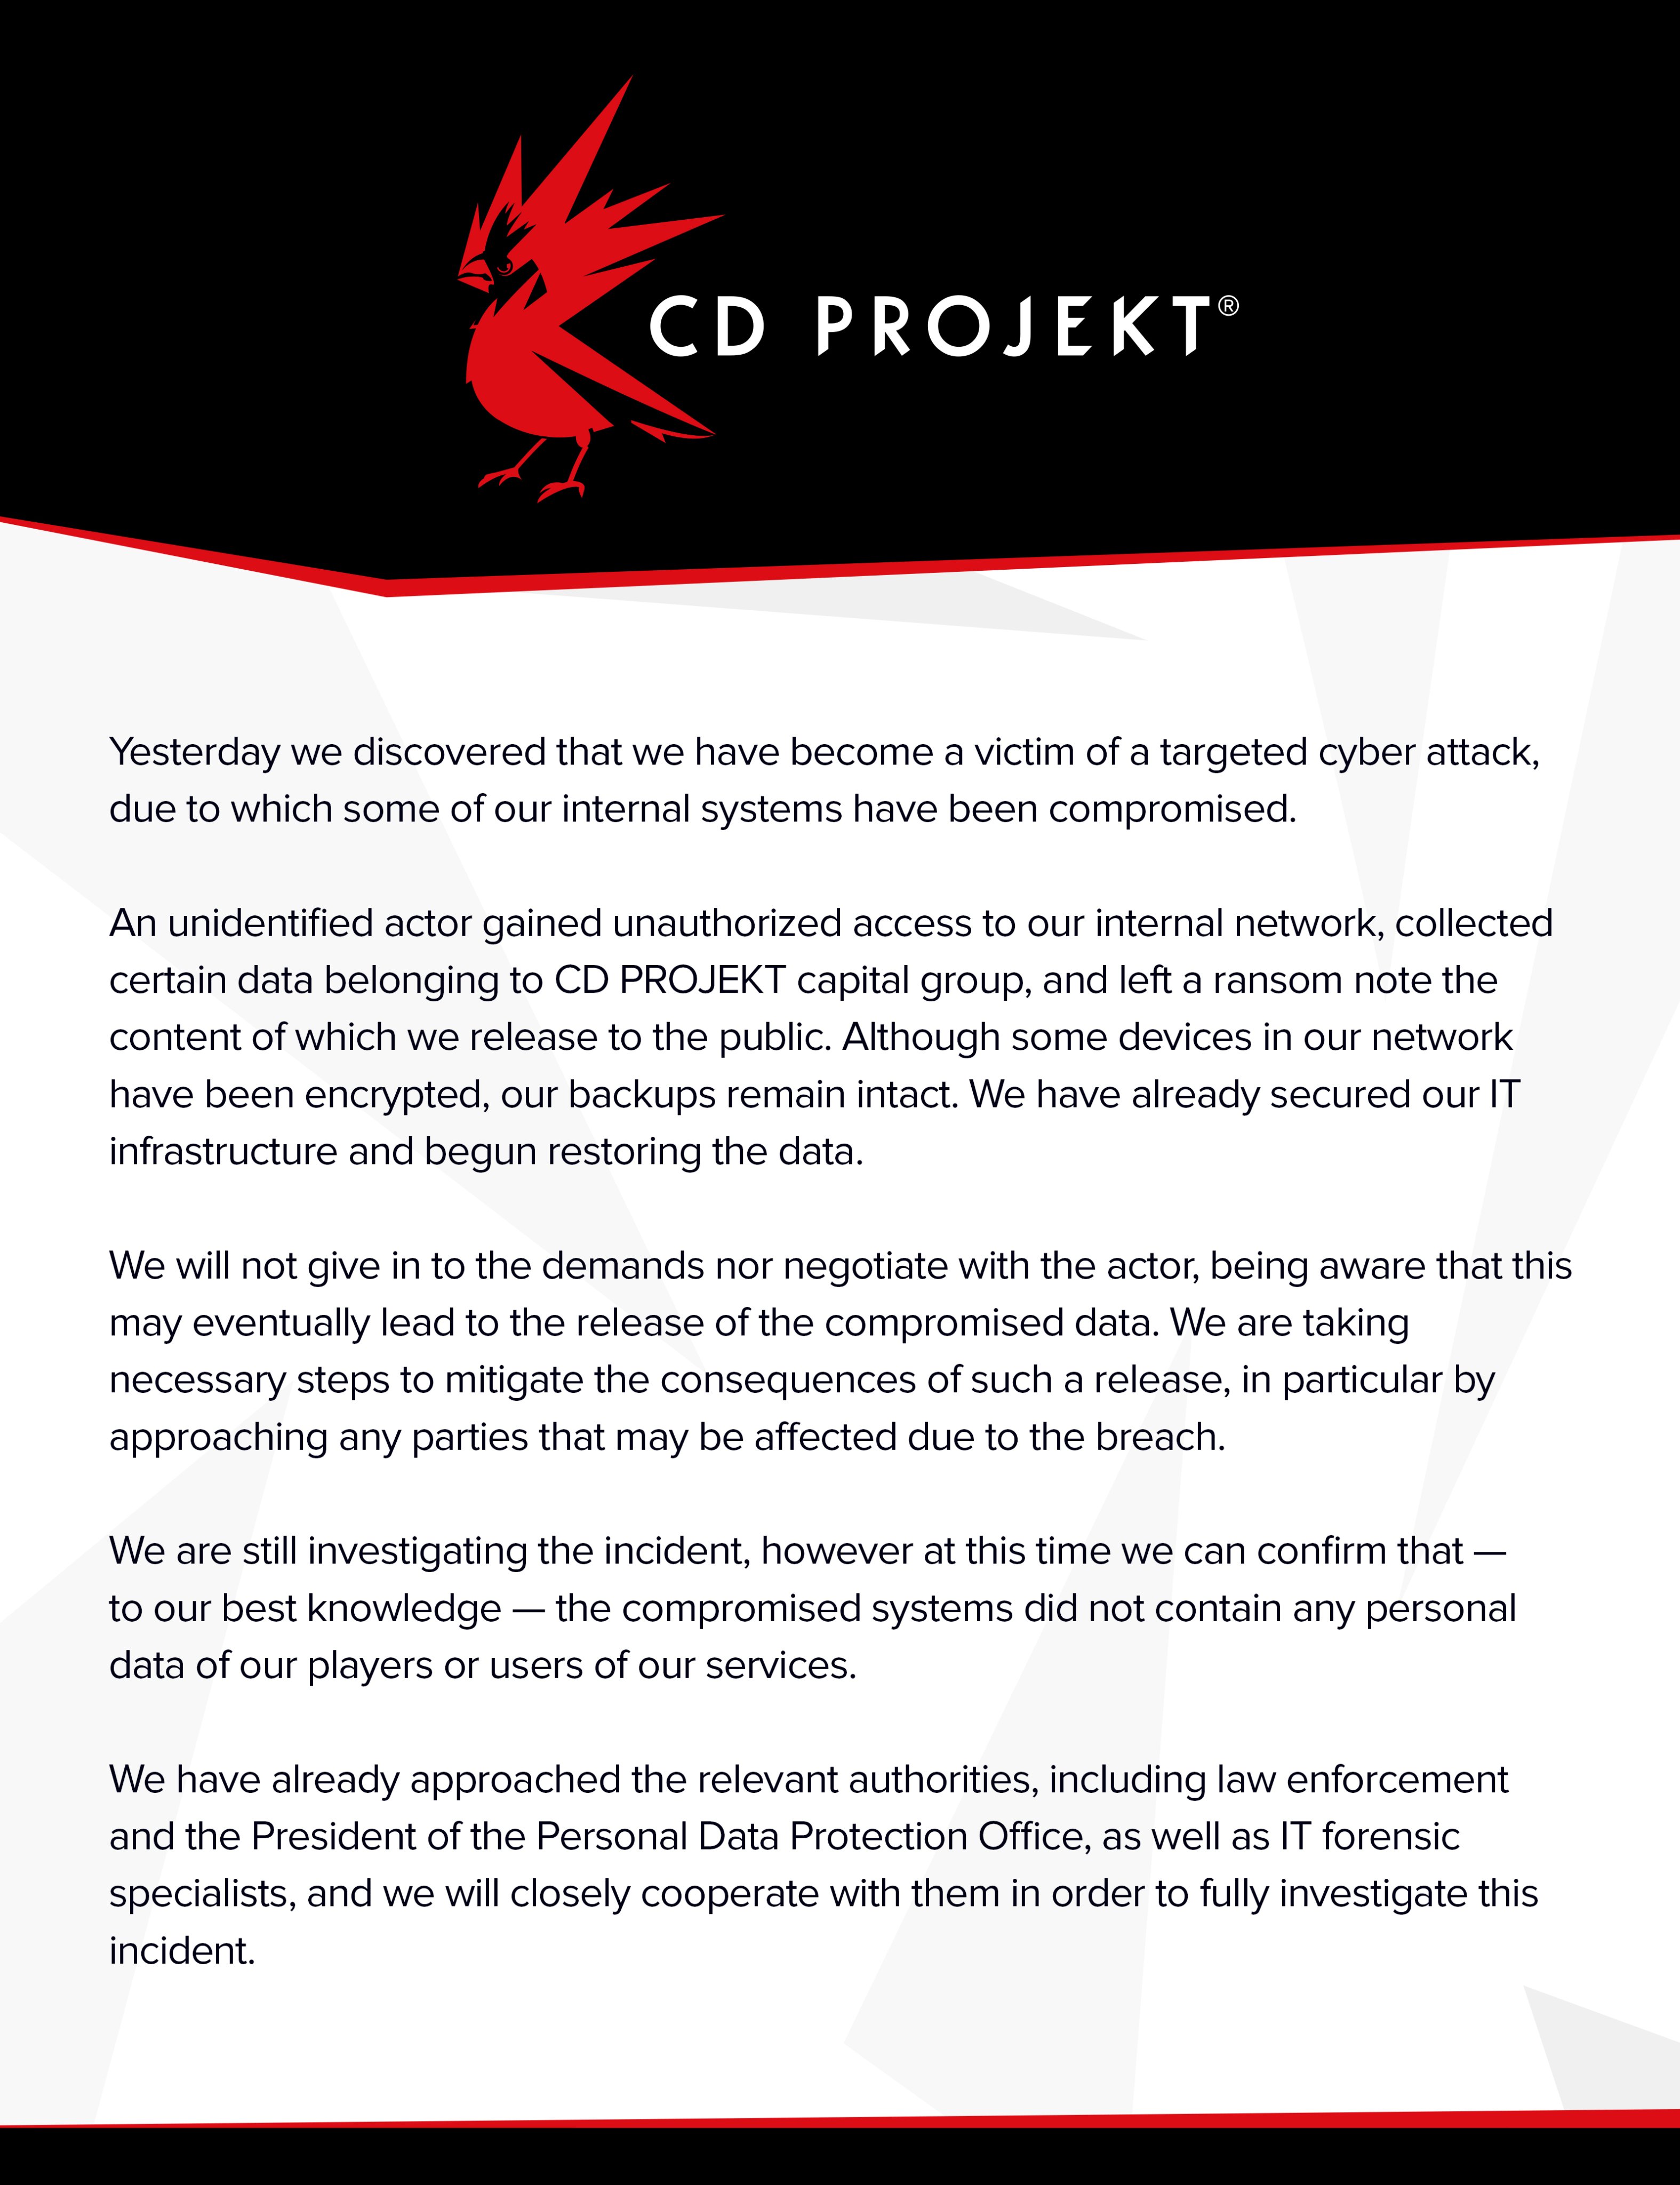 cd projekt red - Cd Projekt Yesterday we discovered that we have become a victim of a targeted cyber attack, due to which some of our internal systems have been compromised. An unidentified actor gained unauthorized access to our Internal network, collect